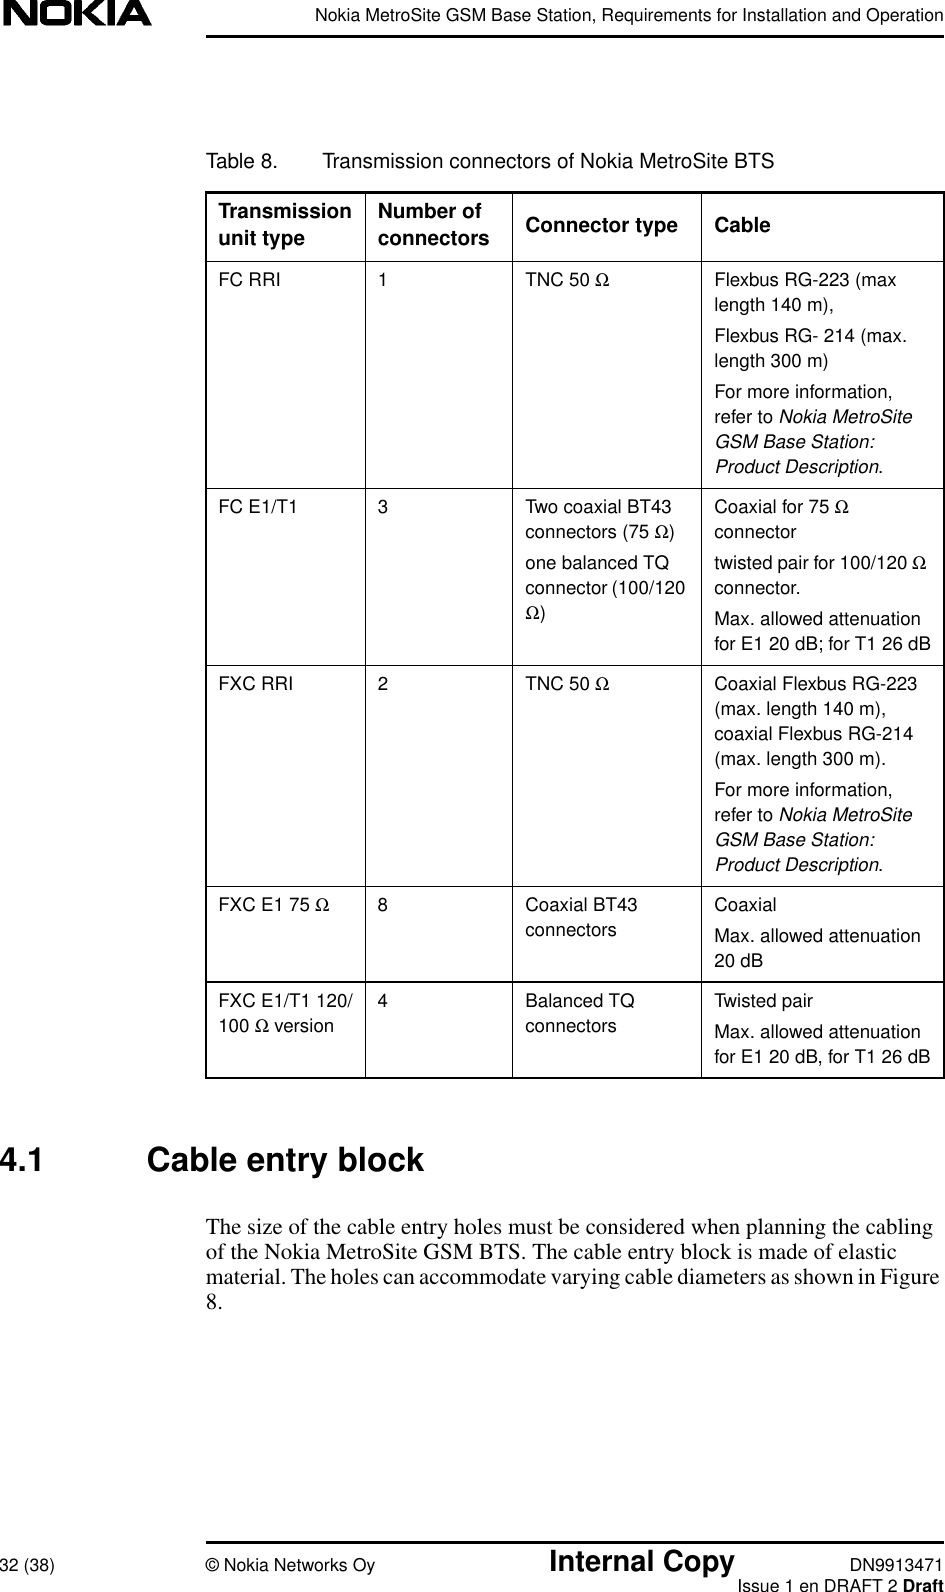 Nokia MetroSite GSM Base Station, Requirements for Installation and Operation32 (38) © Nokia Networks Oy Internal Copy DN9913471Issue 1 en DRAFT 2 Draft4.1 Cable entry blockThe size of the cable entry holes must be considered when planning the cablingof the Nokia MetroSite GSM BTS. The cable entry block is made of elasticmaterial. The holes can accommodate varying cable diameters as shown in Figure8.Table 8. Transmission connectors of Nokia MetroSite BTSTransmissionunit typeNumber ofconnectors Connector type CableFC RRI 1 TNC 50 ΩFlexbus RG-223 (maxlength 140 m),Flexbus RG- 214 (max.length 300 m)For more information,refer toNokia MetroSiteGSM Base Station:Product Description.FC E1/T1 3 Two coaxial BT43connectors (75 Ω)one balanced TQconnector (100/120Ω)Coaxial for 75 Ωconnectortwisted pair for 100/120 Ωconnector.Max. allowed attenuationfor E1 20 dB; for T1 26 dBFXC RRI 2 TNC 50 ΩCoaxial Flexbus RG-223(max. length 140 m),coaxial Flexbus RG-214(max. length 300 m).For more information,refer toNokia MetroSiteGSM Base Station:Product Description.FXC E1 75 Ω8 Coaxial BT43connectorsCoaxialMax. allowed attenuation20 dBFXC E1/T1 120/100 Ω version4 Balanced TQconnectorsTwisted pairMax. allowed attenuationfor E1 20 dB, for T1 26 dB